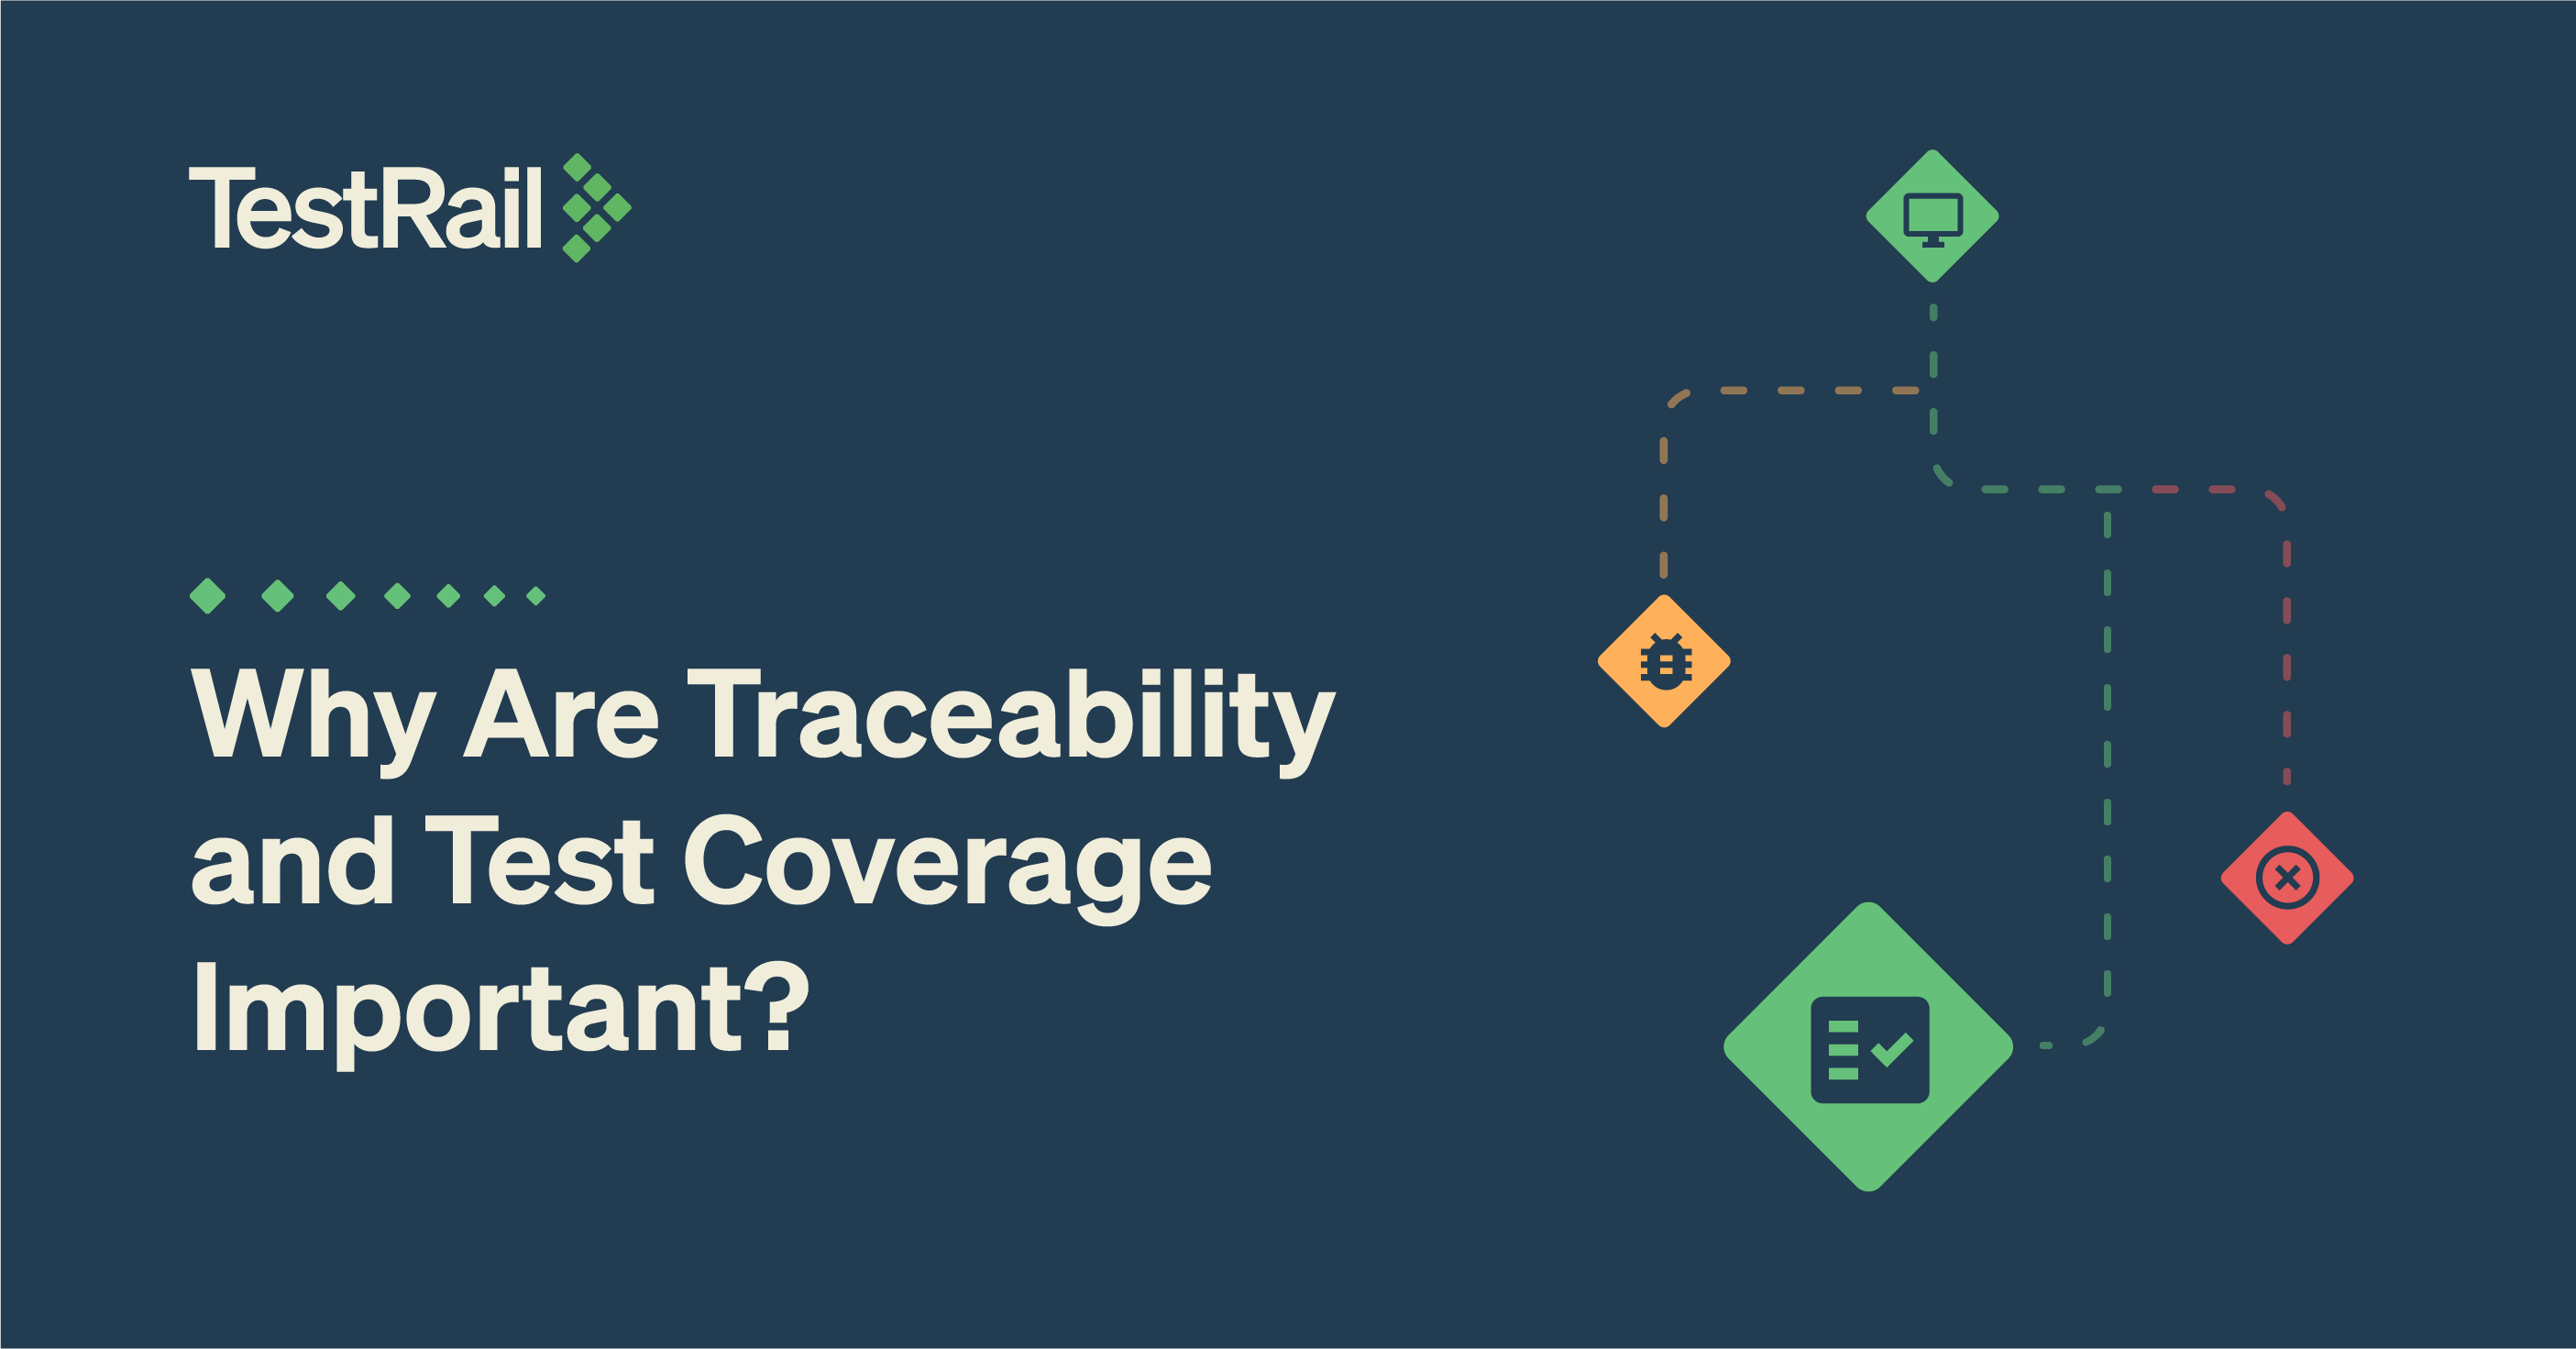 Why Are Traceability and Test Coverage Important?